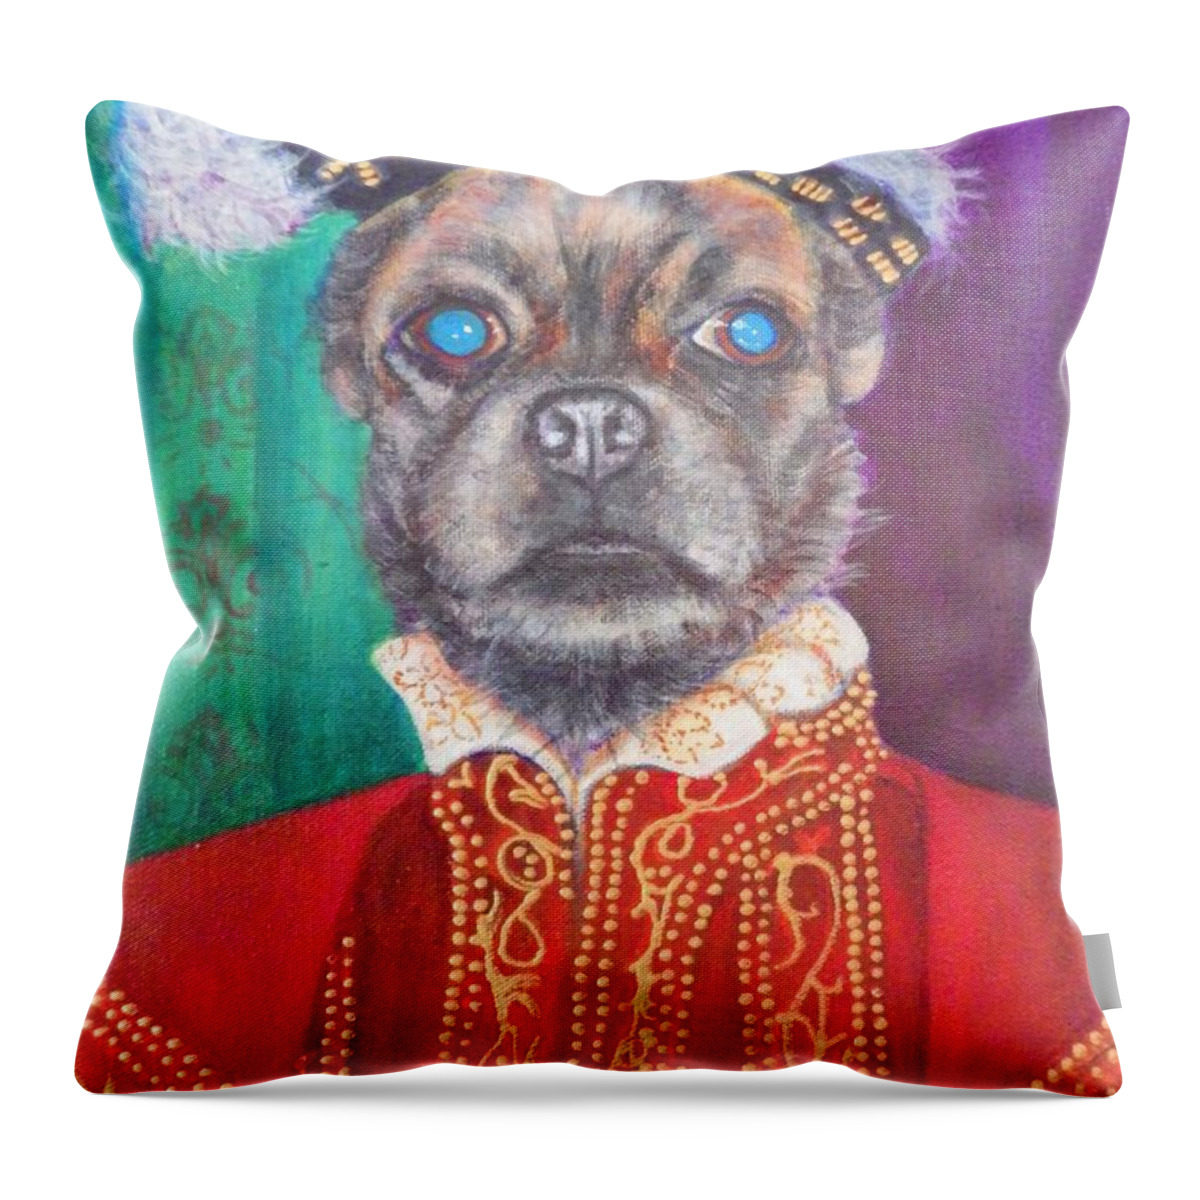 Whimsical Throw Pillow featuring the painting Bugsy First Earl of Primrose by Linda Markwardt